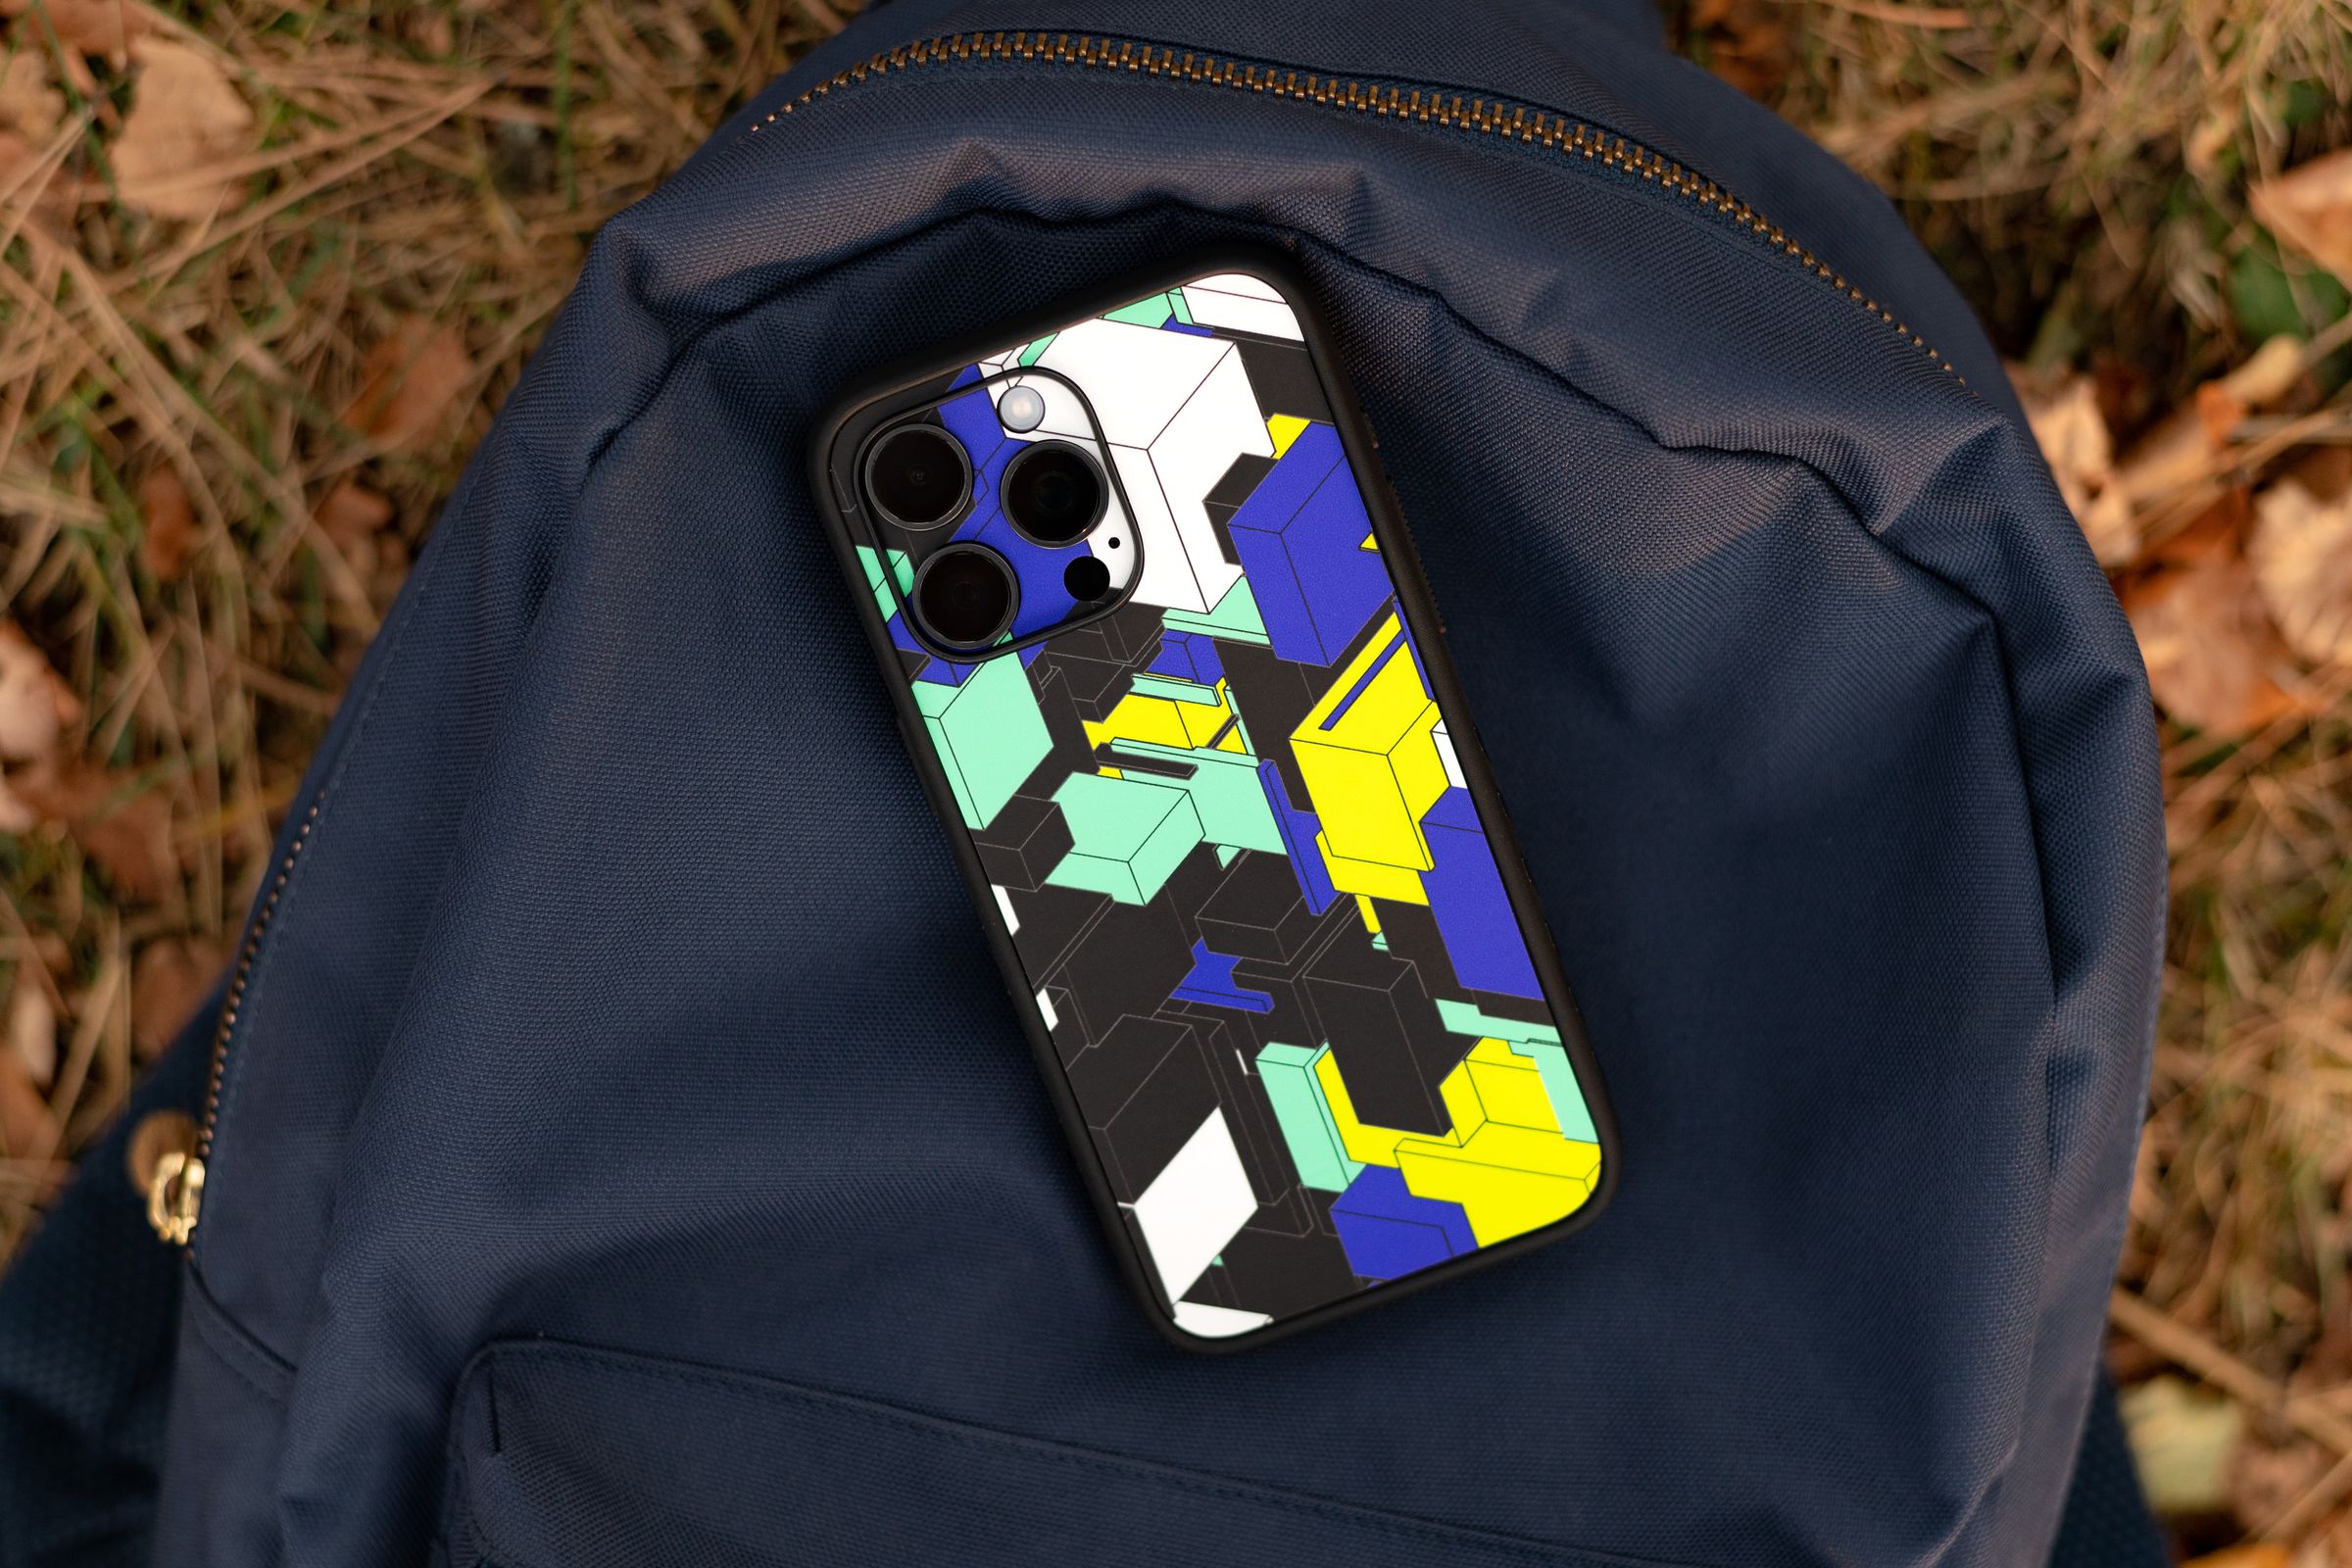 The Verge’s Blocks skin with a dbrand Grip case on an iPhone sitting on a backpack outside